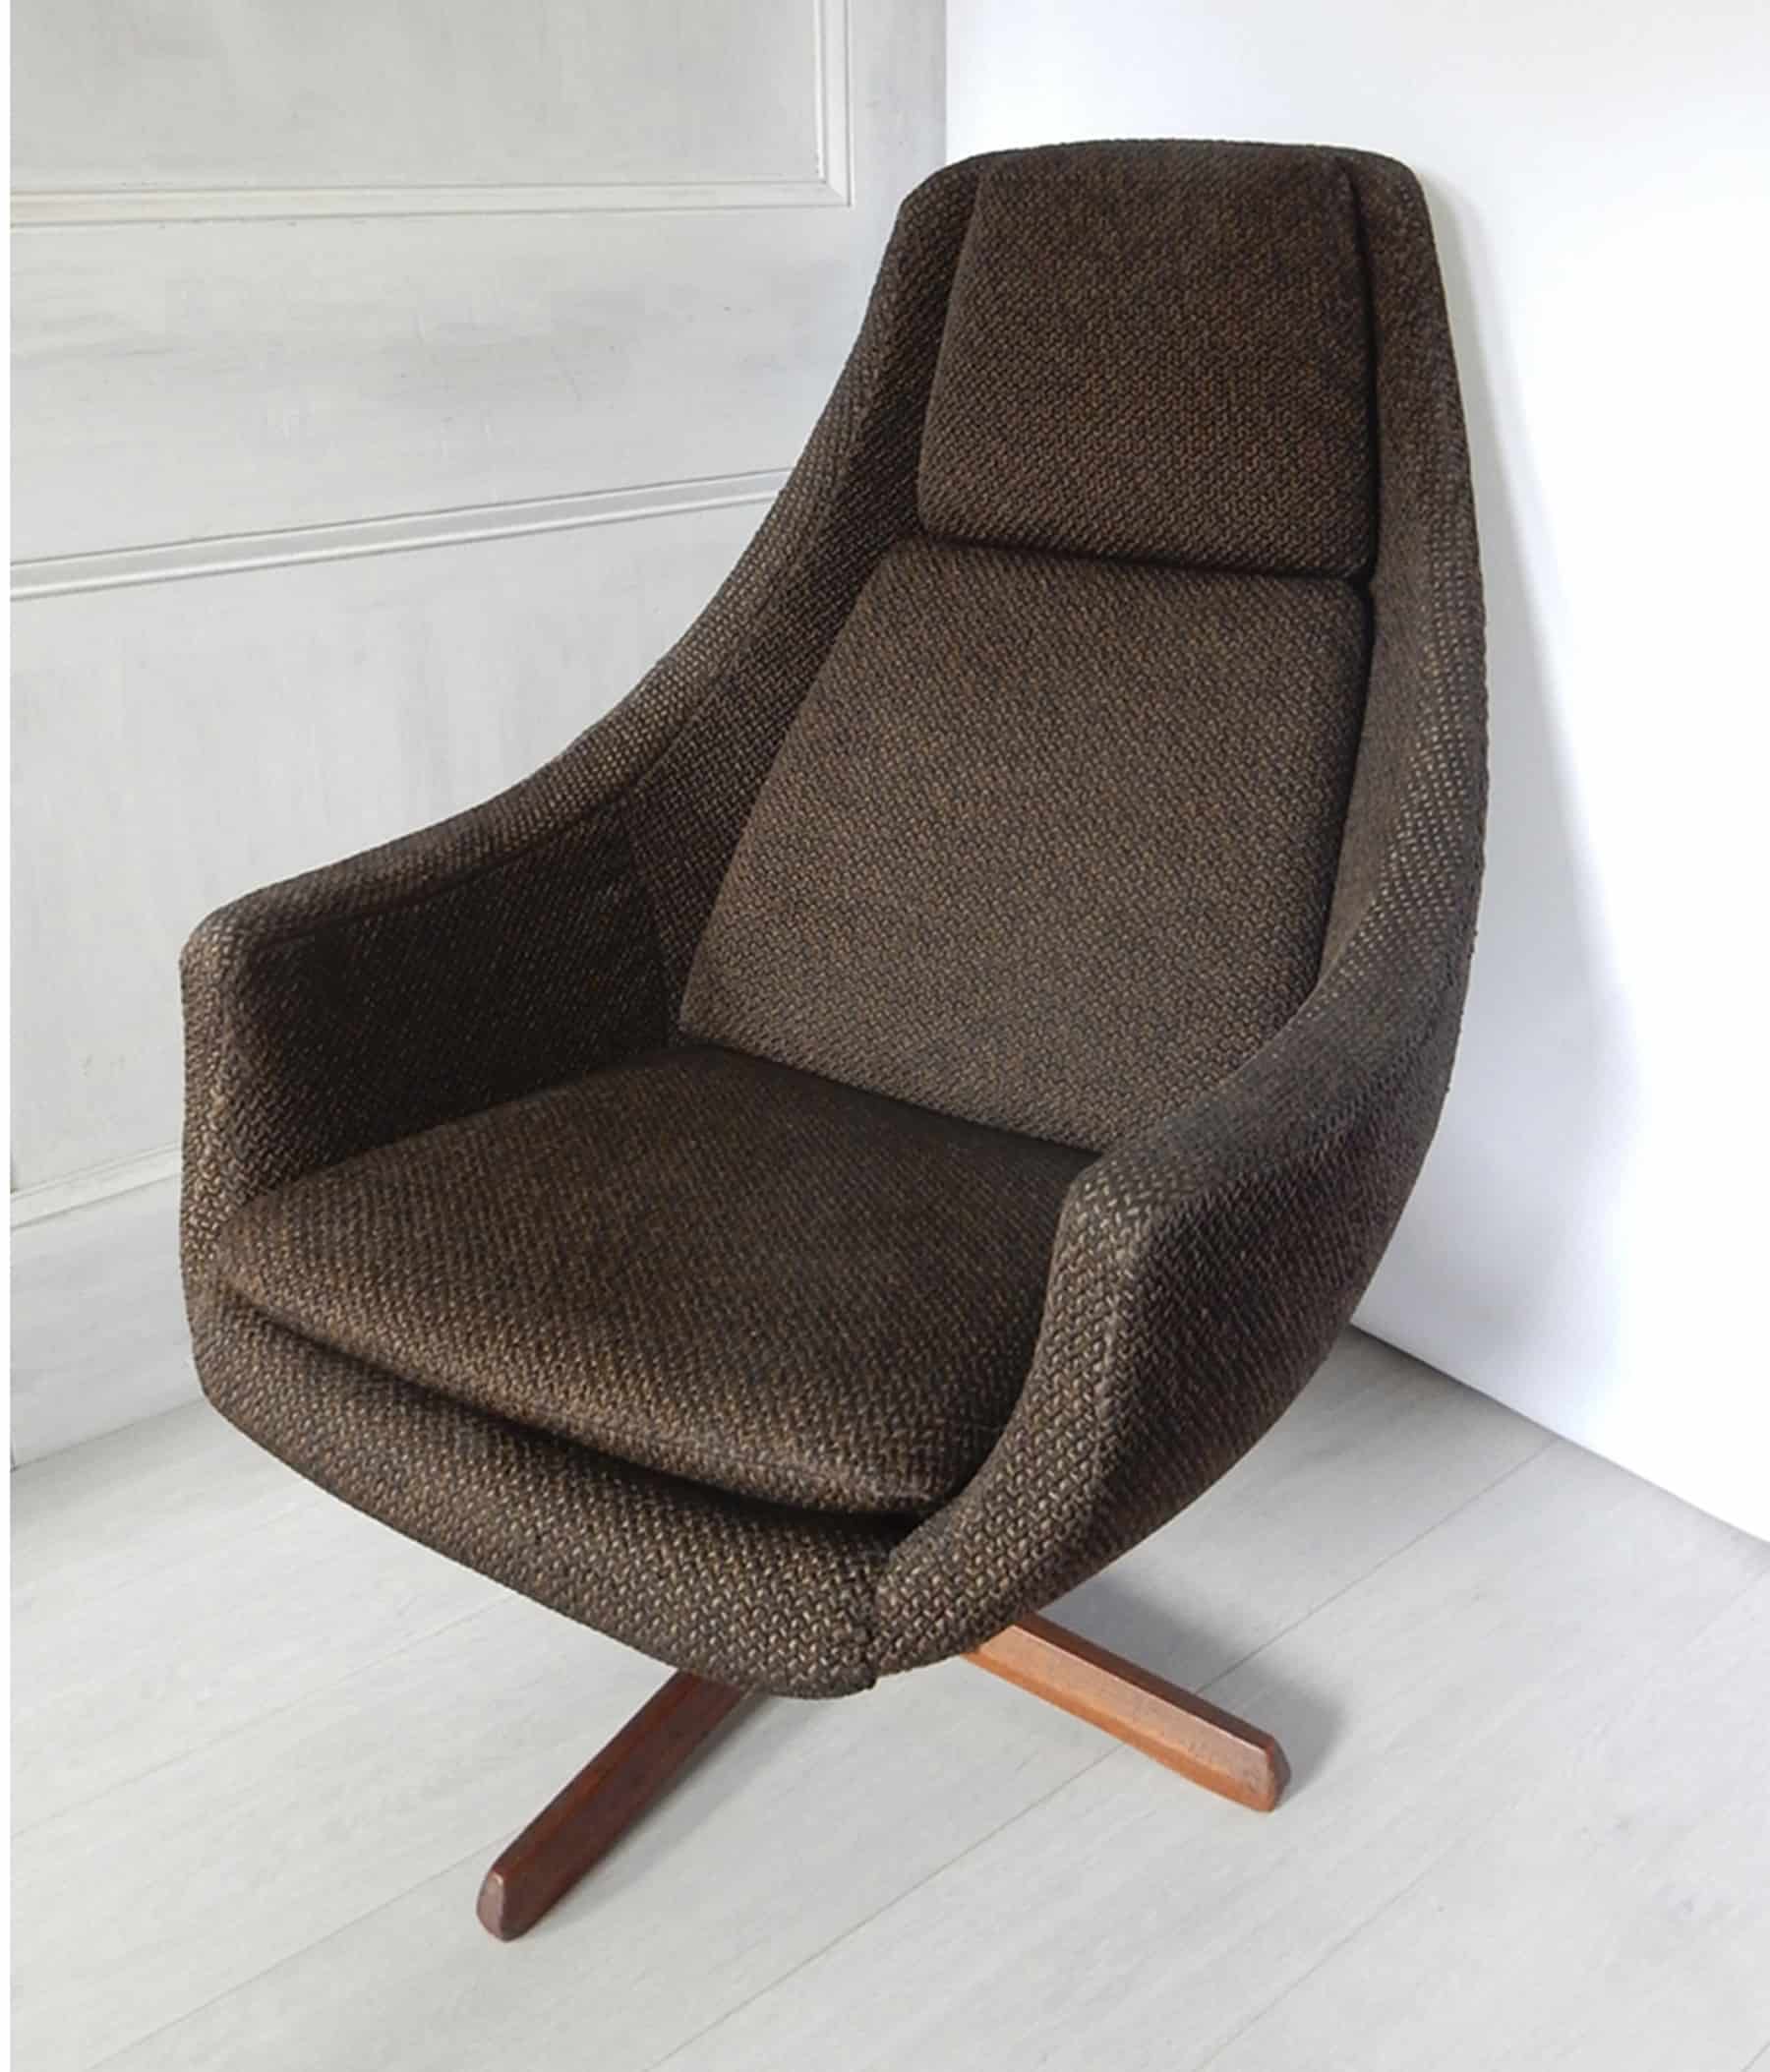 Misty Wood Chairs Brown Swivel Chair Sold